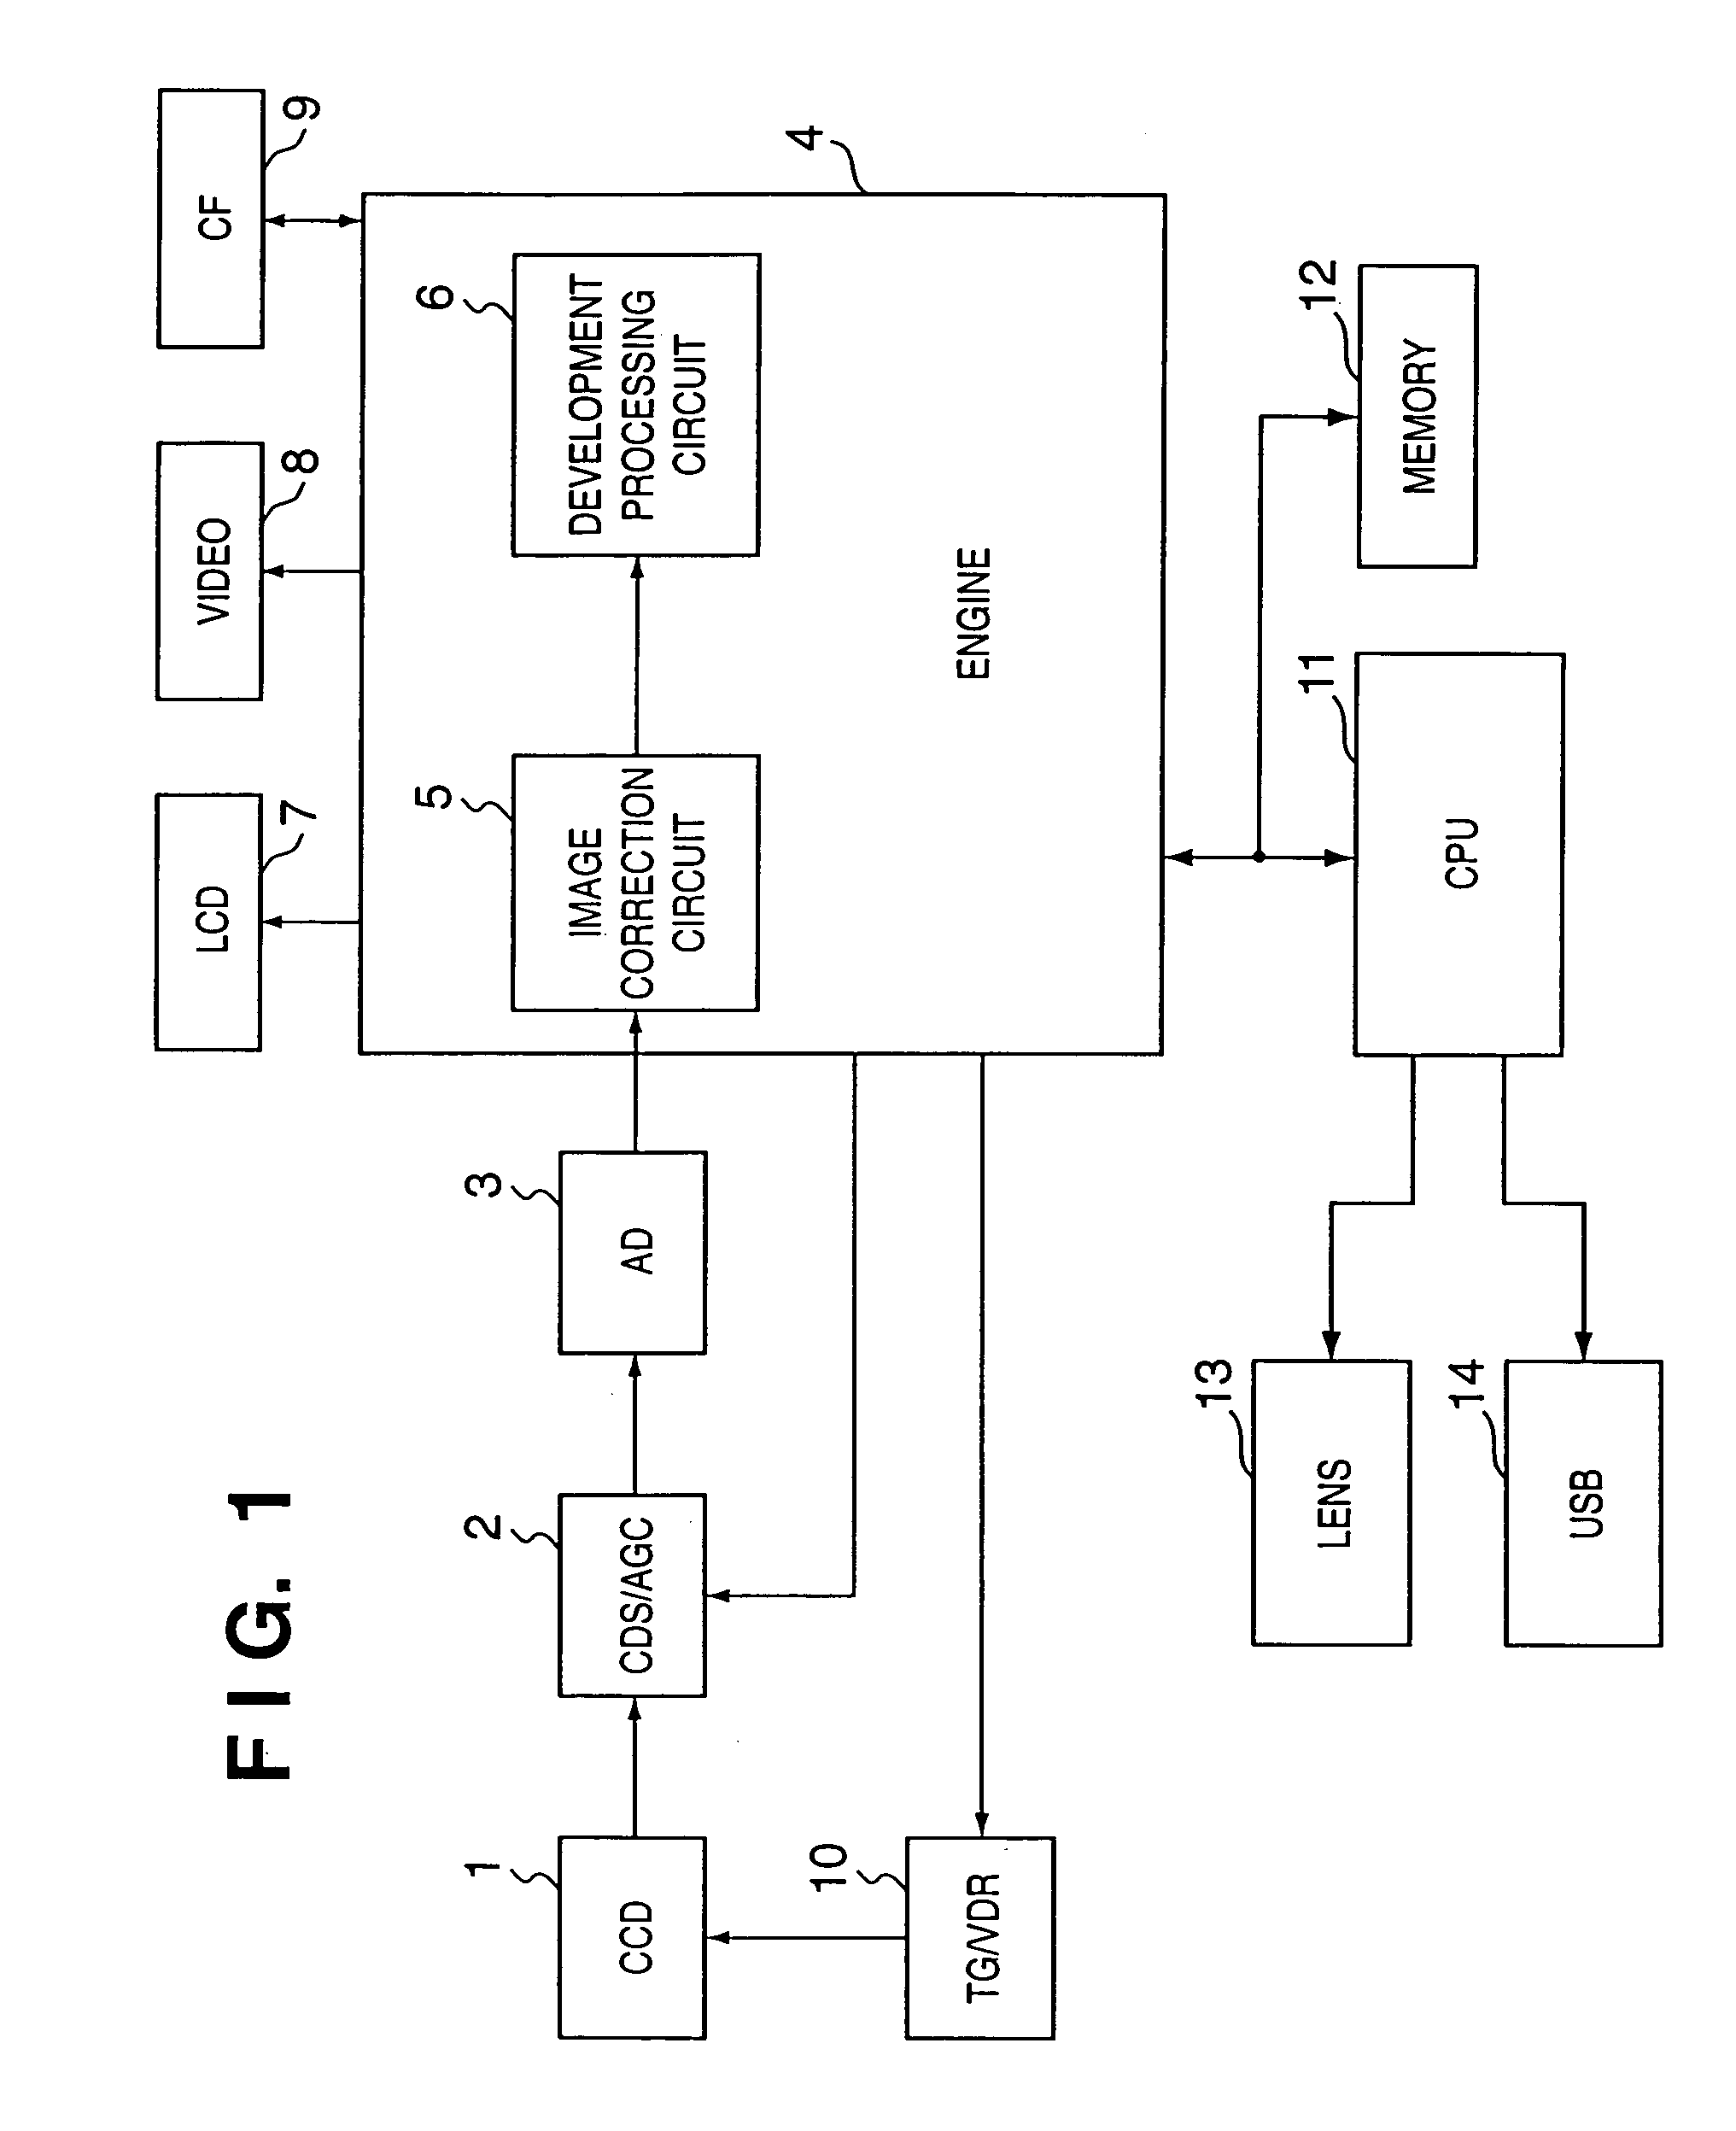 Image processing apparatus having an image correction circuit and its processing method